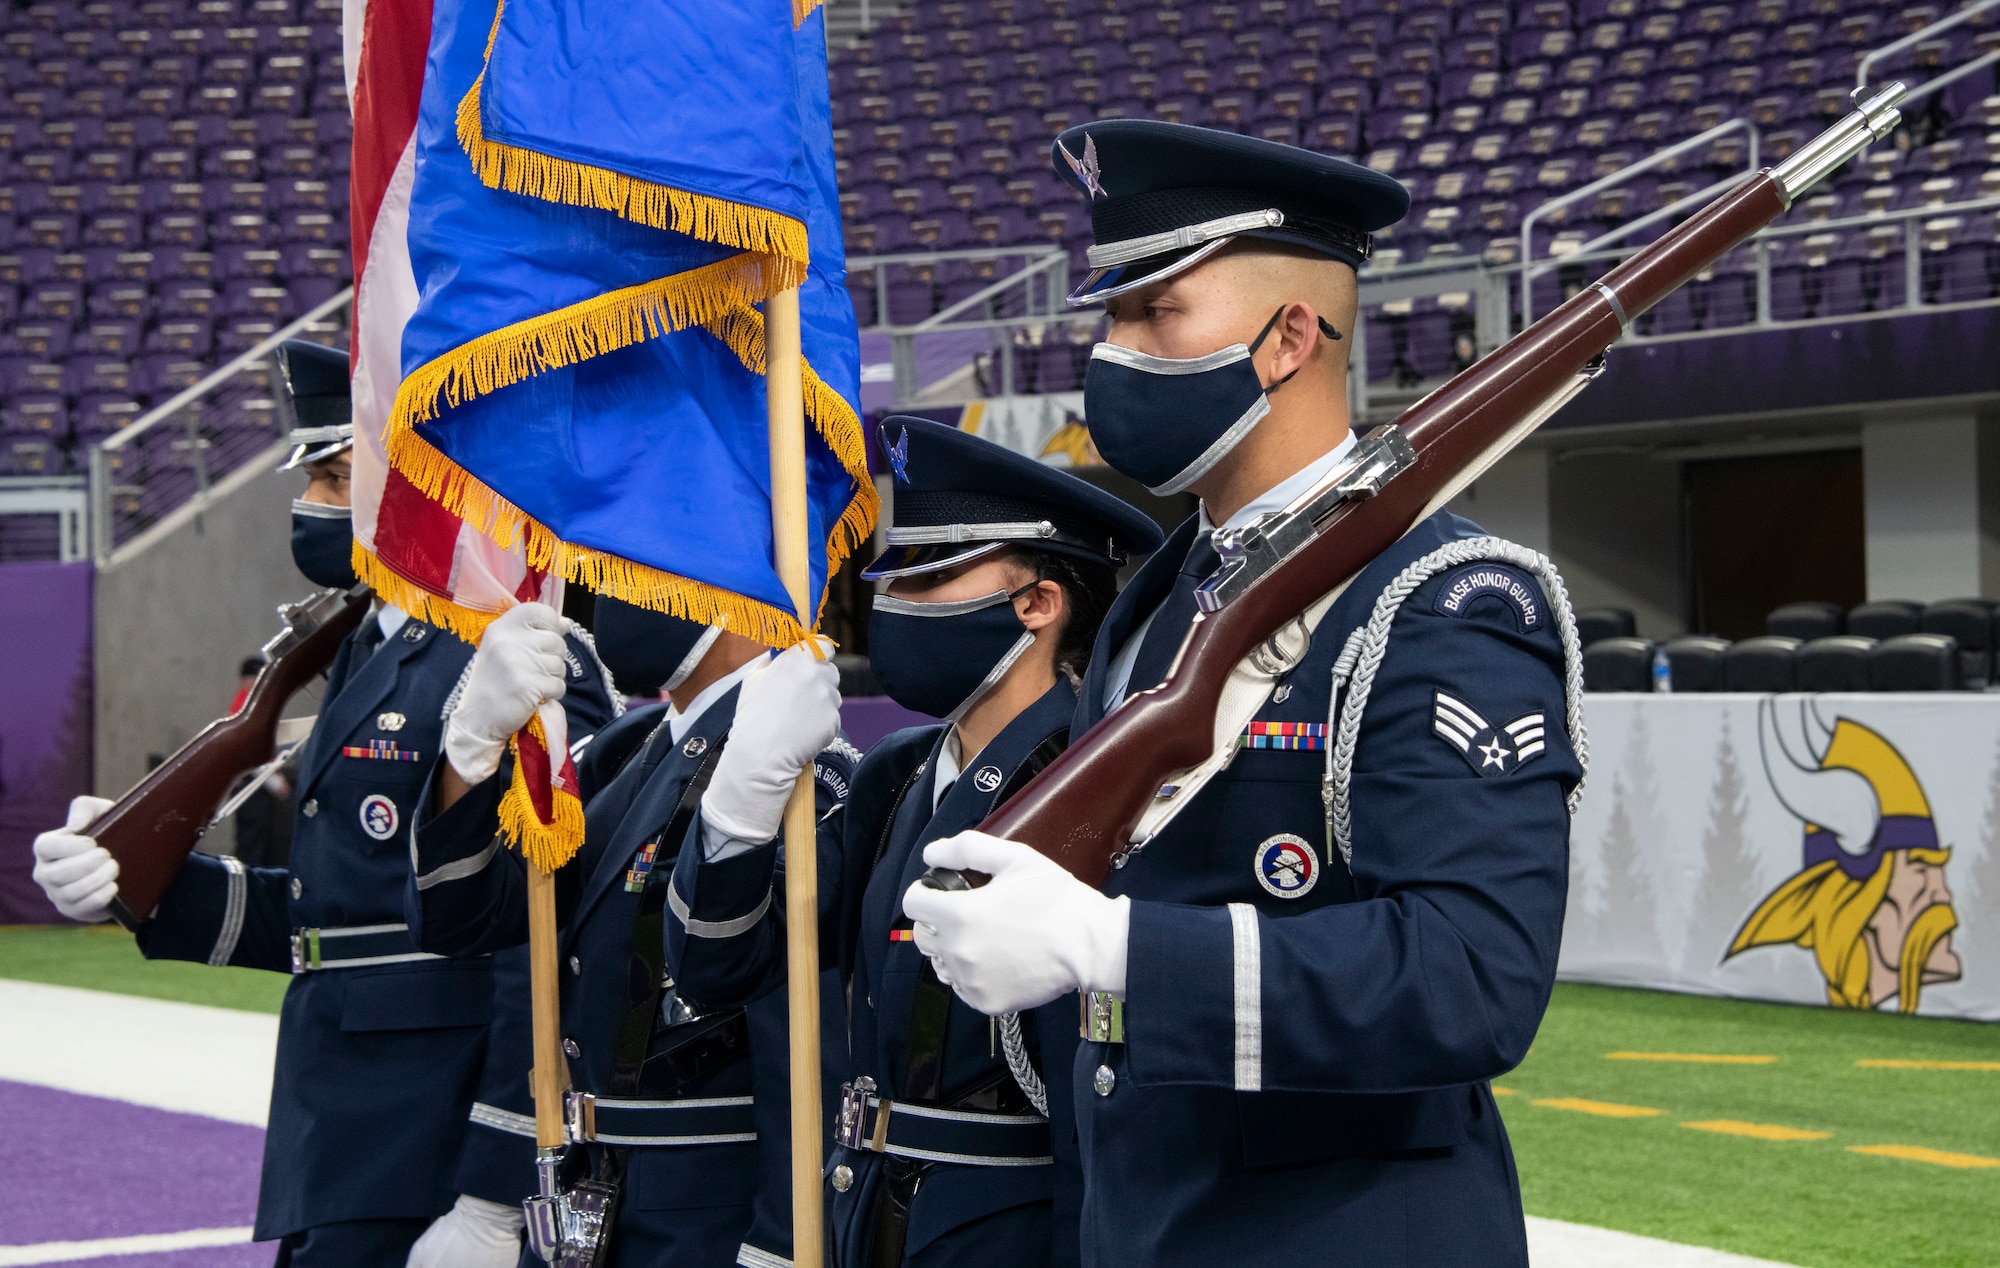 Four honor guardsmen stand in front of an empty stadium